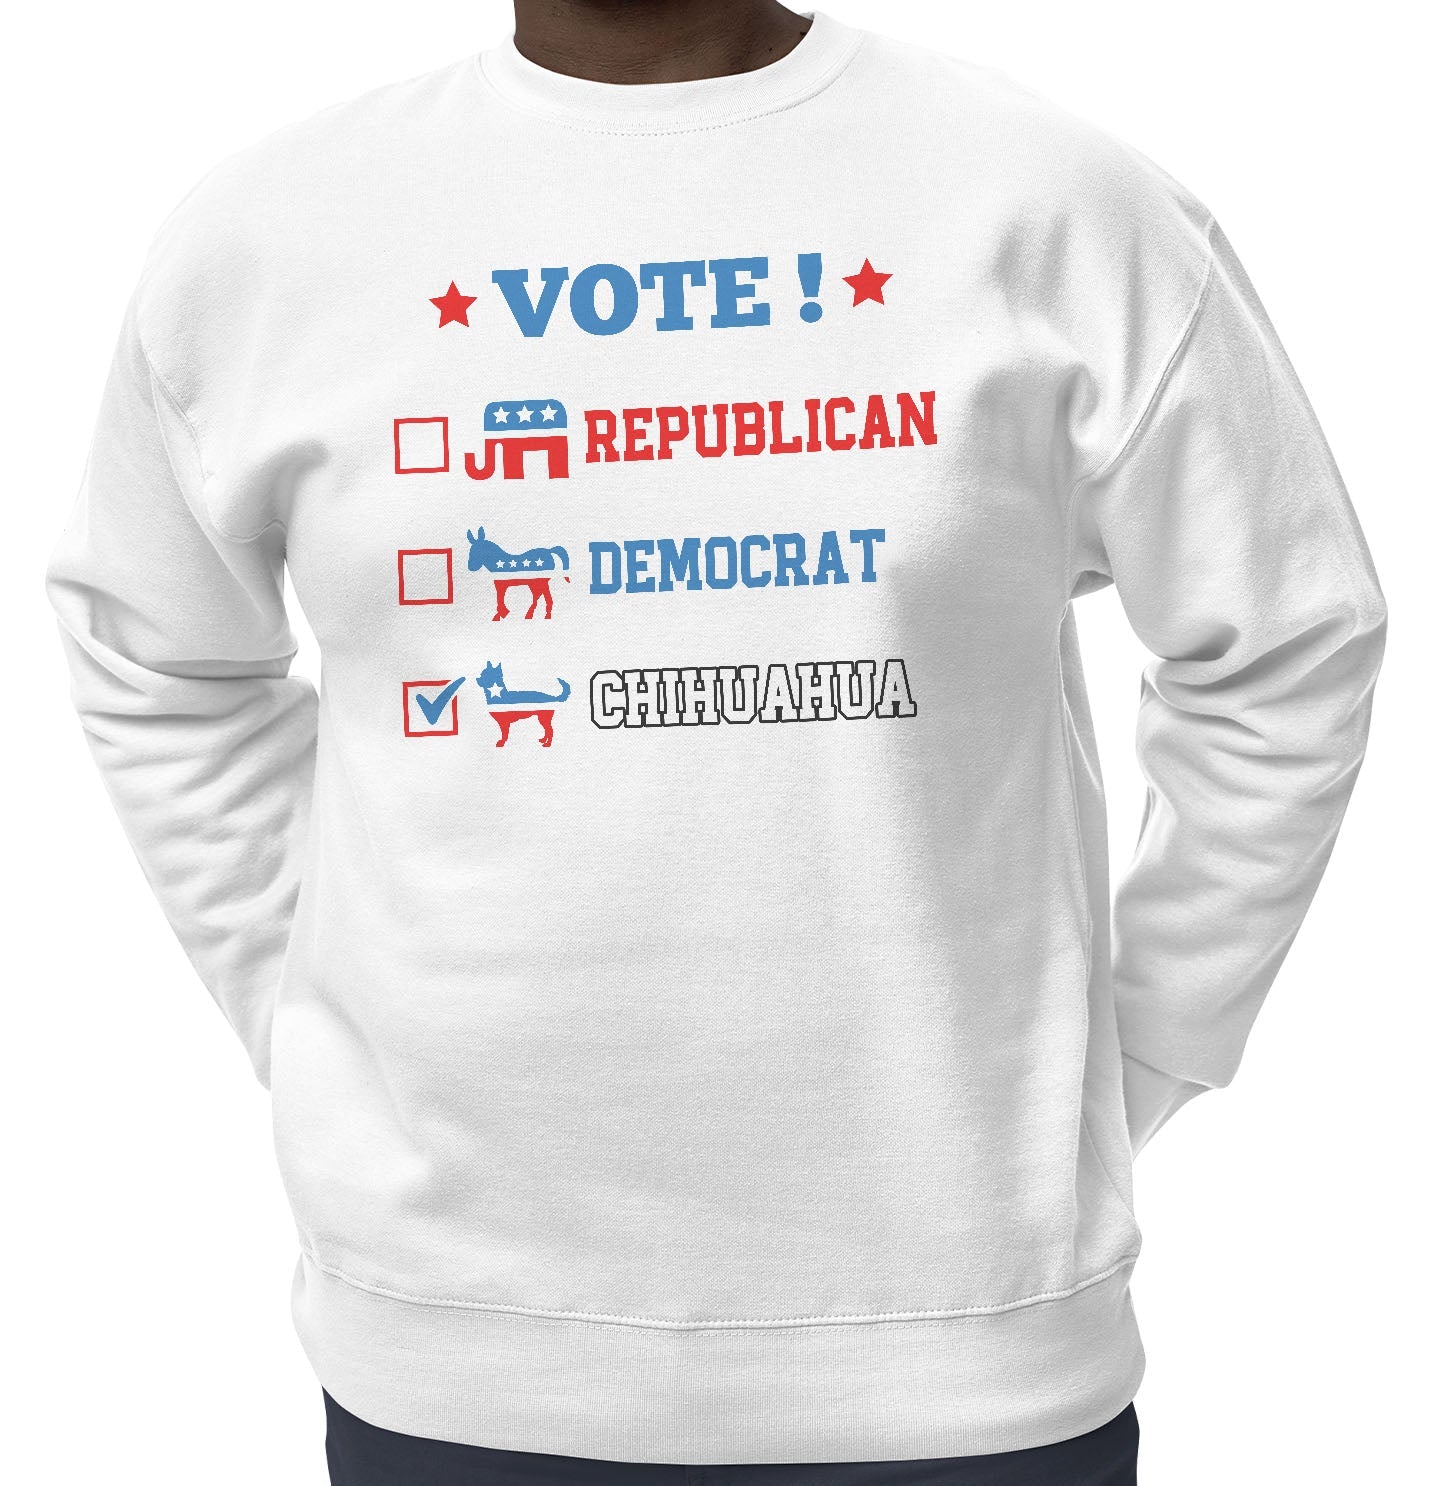 Vote for the Chihuahua (Short-Haired) - Adult Unisex Crewneck Sweatshirt